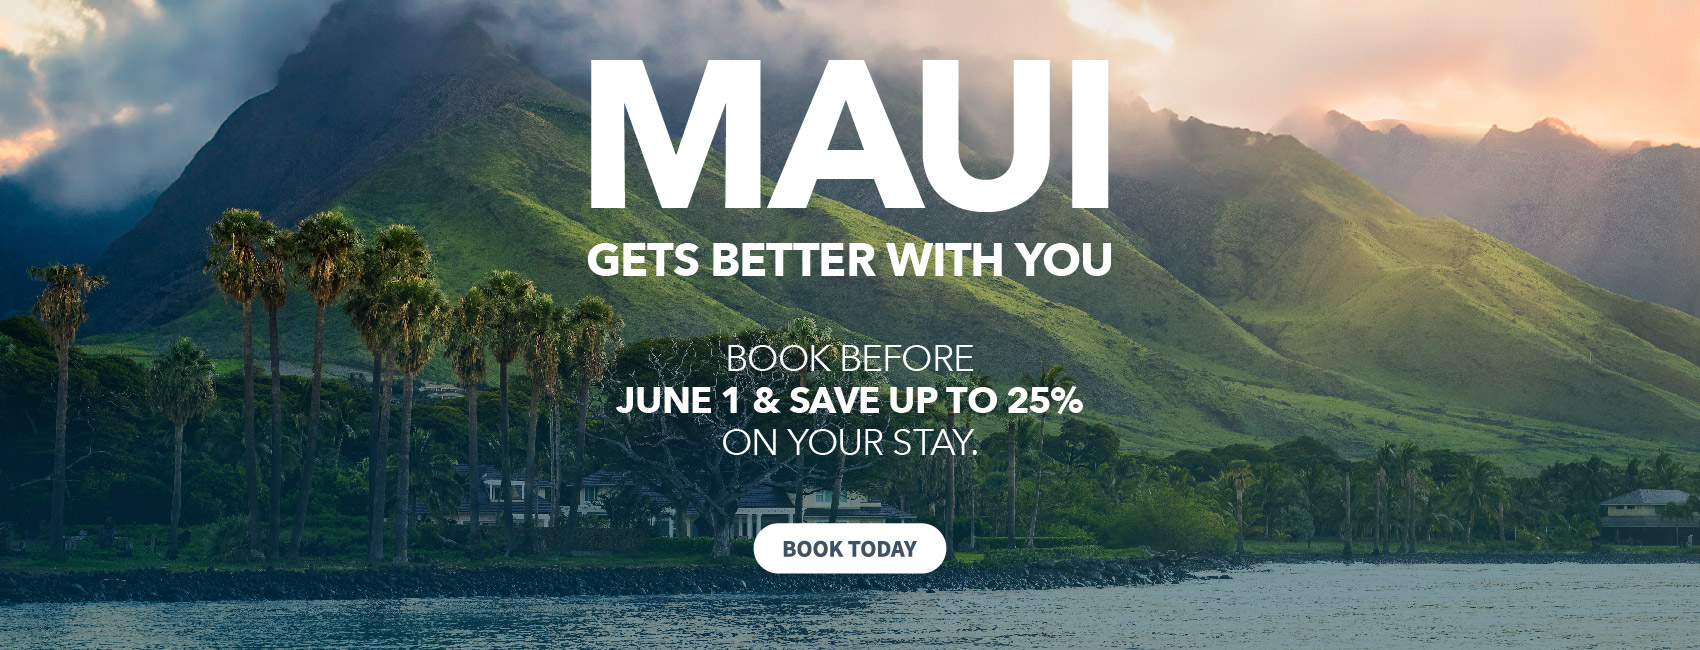 Maui Gets Better With You. Book before 5月16日th and save up to 25% on your stay. Book Today.